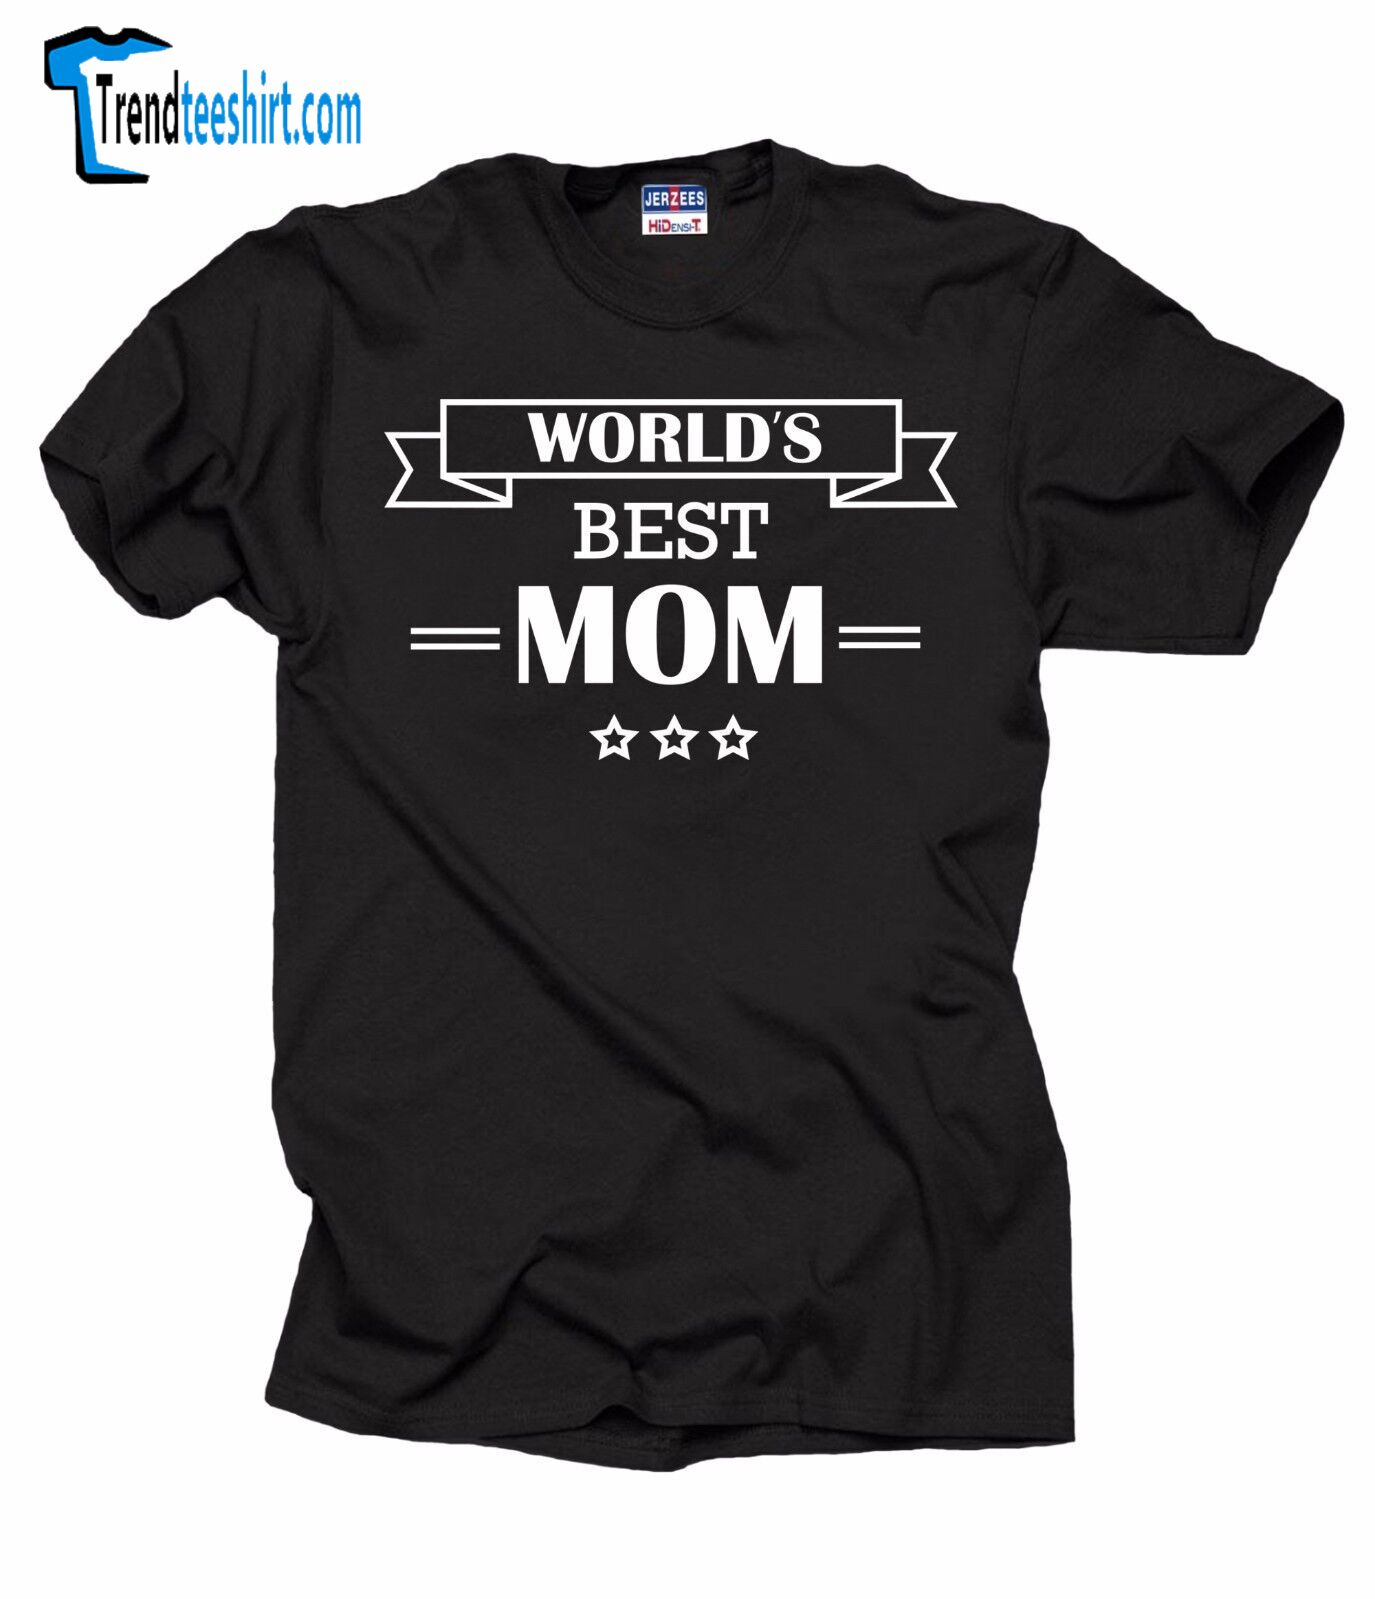 World's Best Mom Mother's Day Funny Comical Humor Gag Gift Tee T-shirt